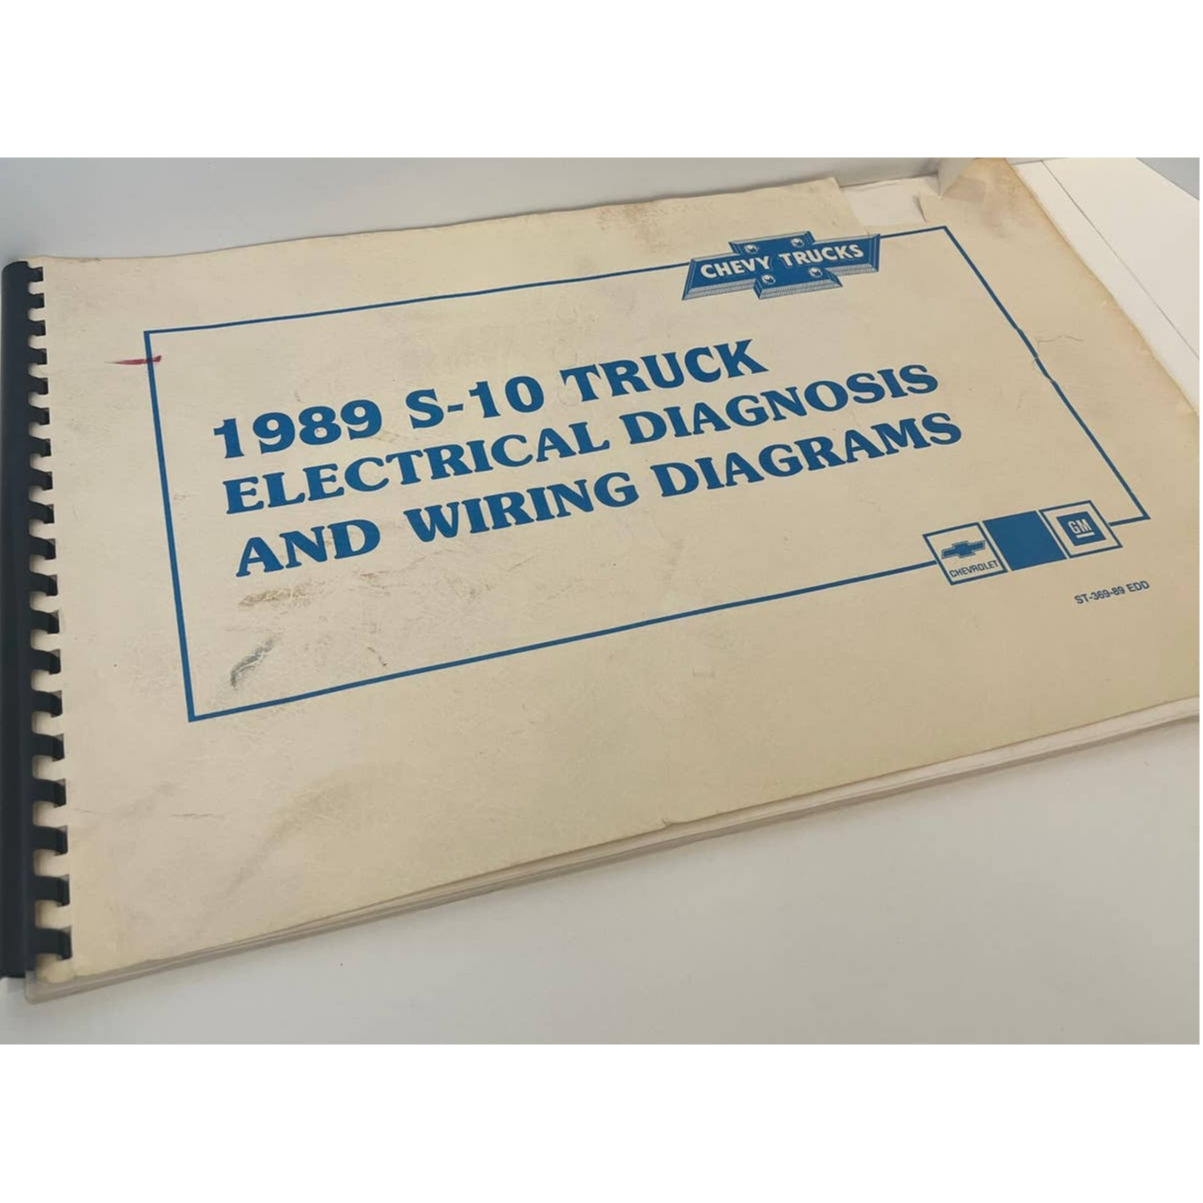 1989 Chevrolet S-10 pickup truck electrical wiring diagrams shop service manual 